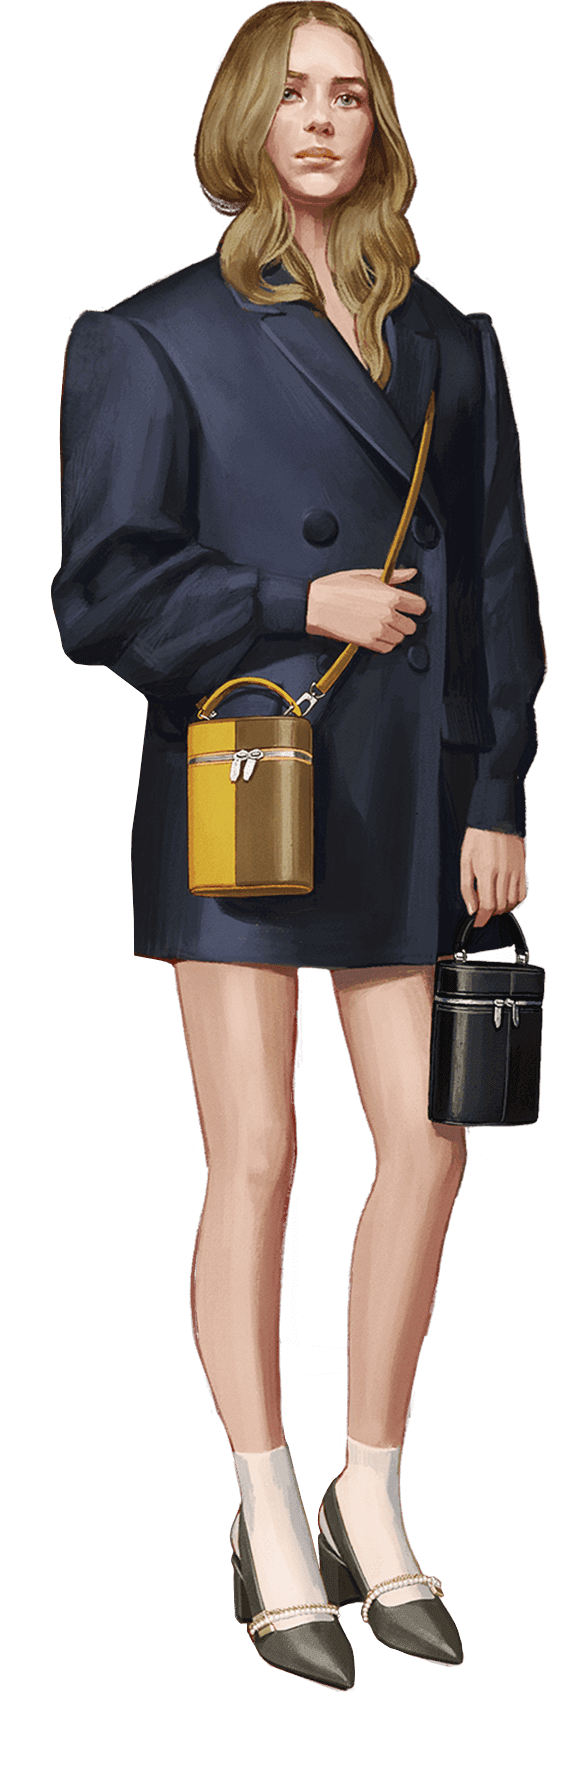 A compilation of illustrations from the CHARLES & KEITH Autumn Winter 2020 campaign - CHARLES & KEITH - Model 2